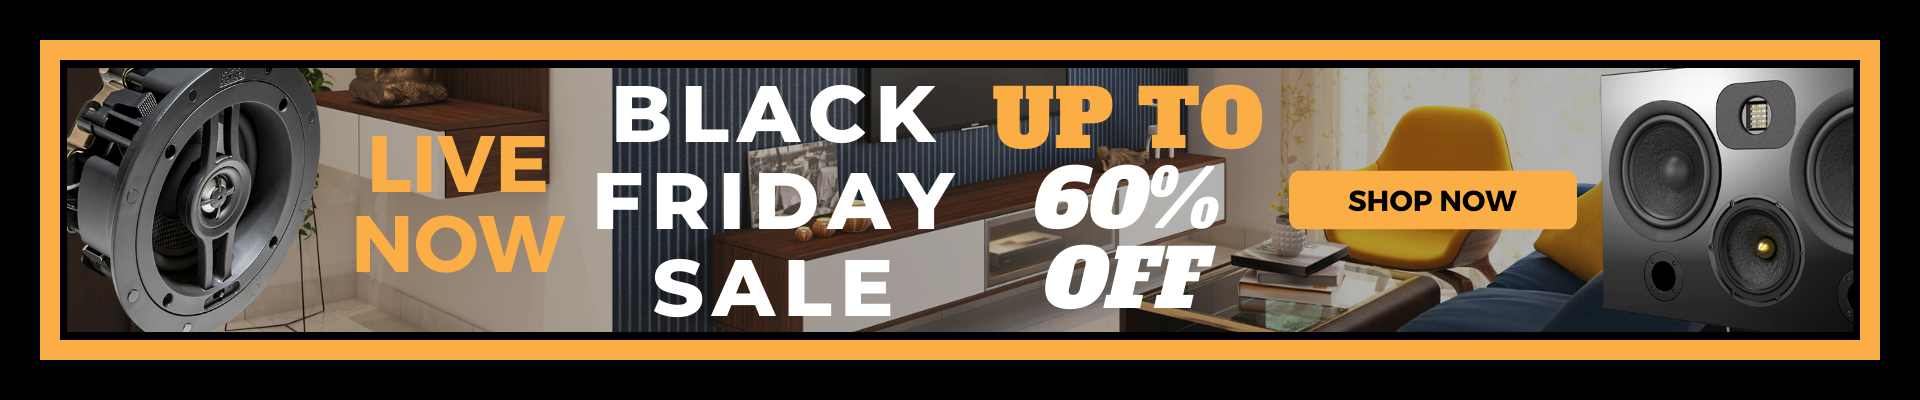 Black Friday Sale Live Now Banner. Deals Up to 60% Off. Shop Now